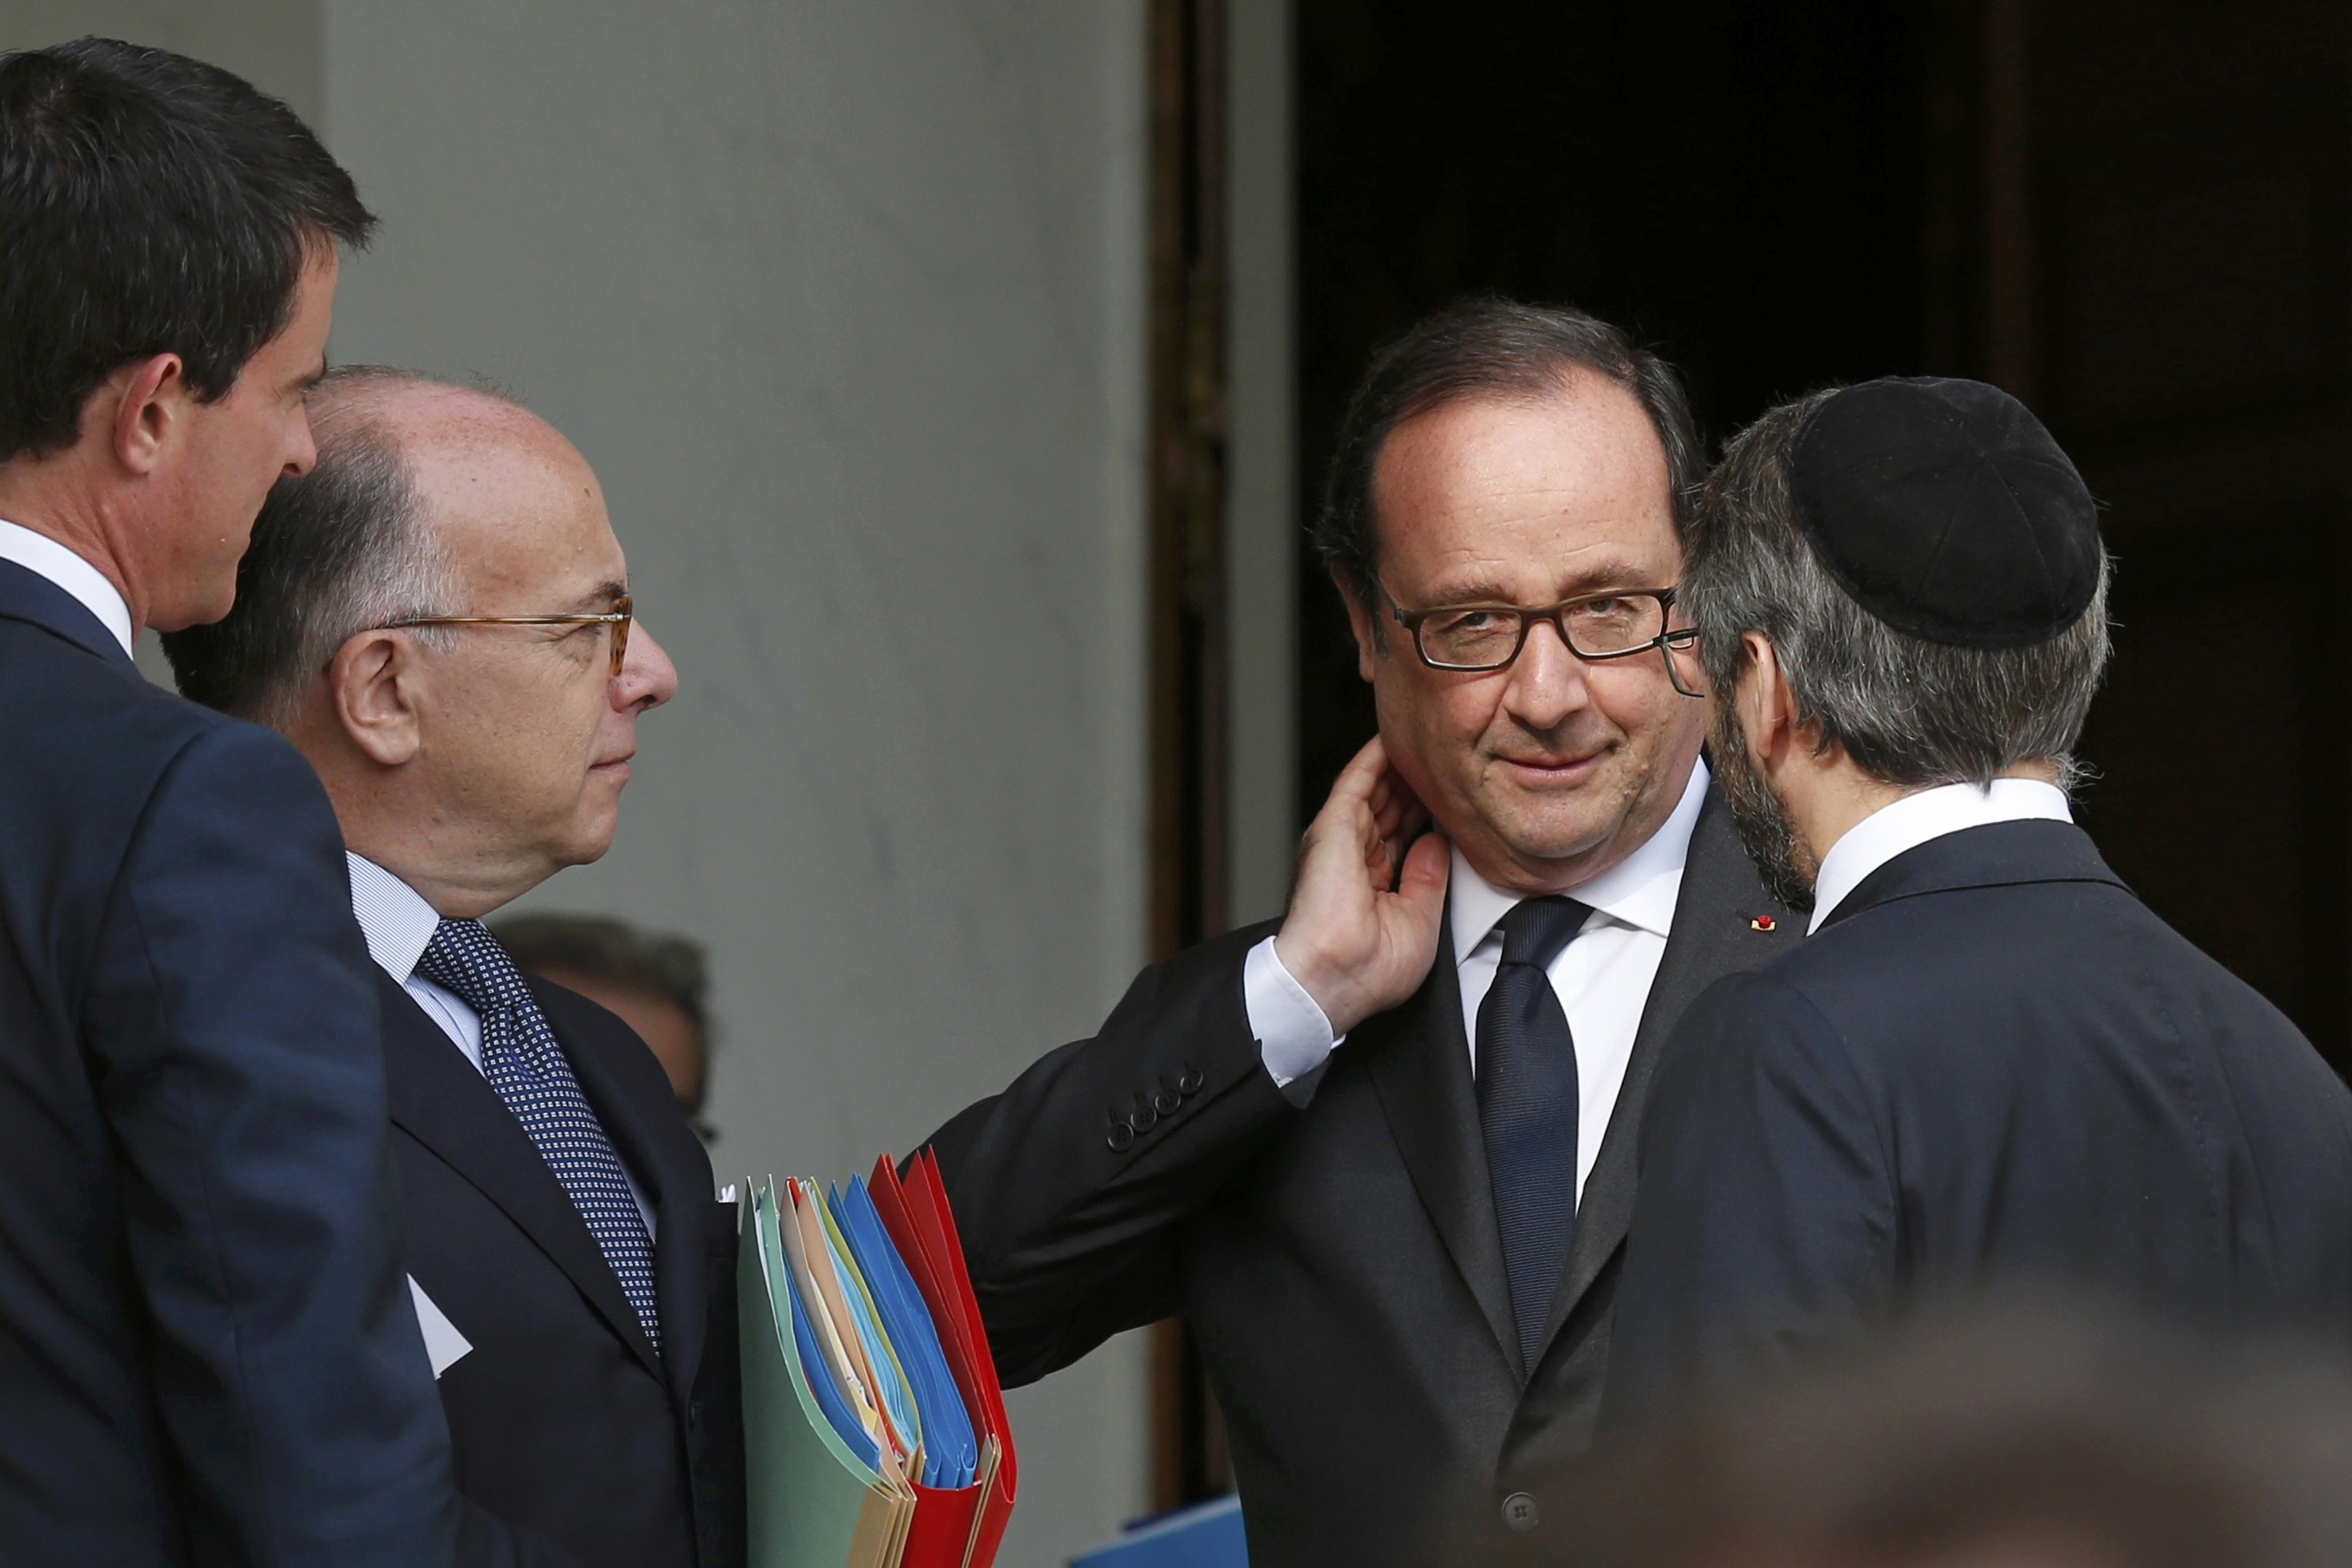 French government faces criticism over security after church attack